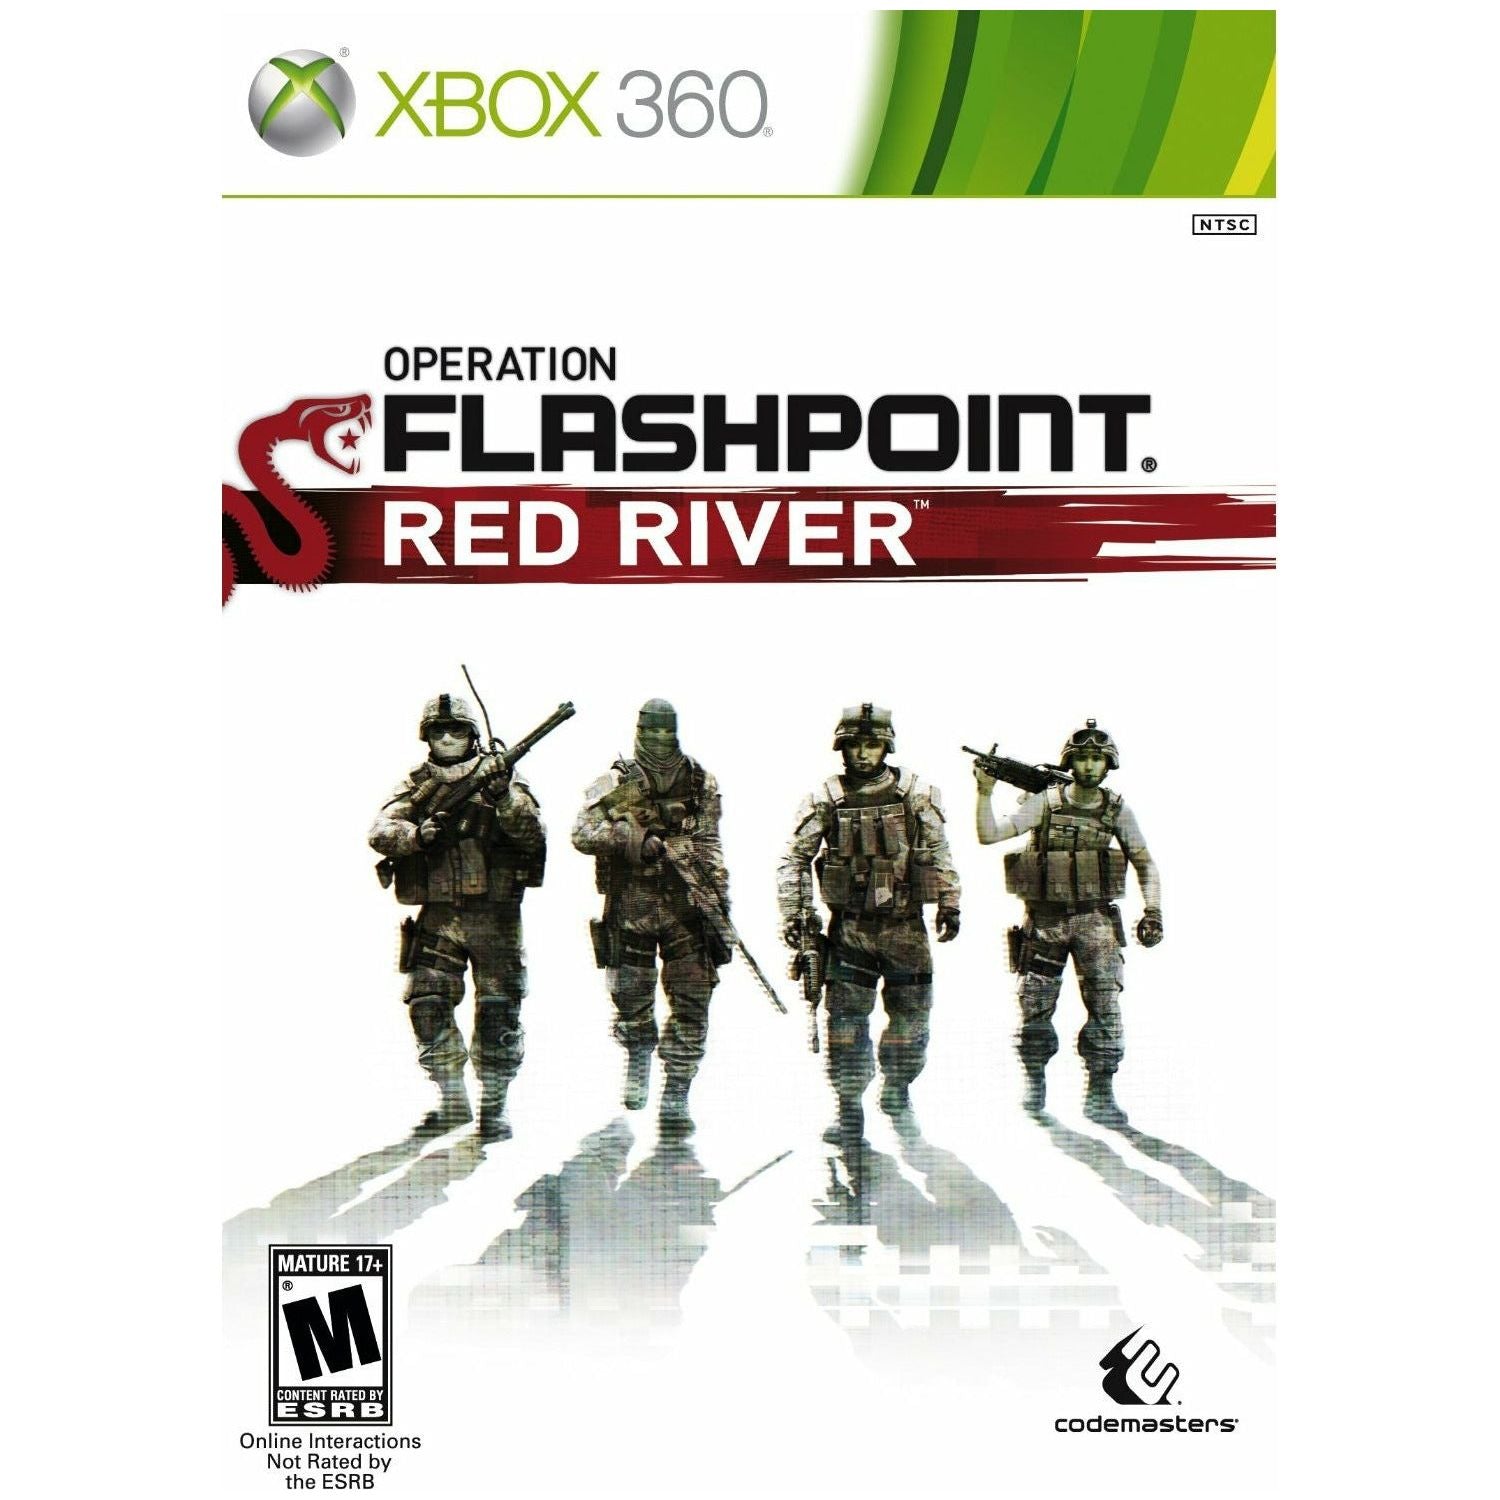 XBOX 360 - Operation Flashpoint Red River